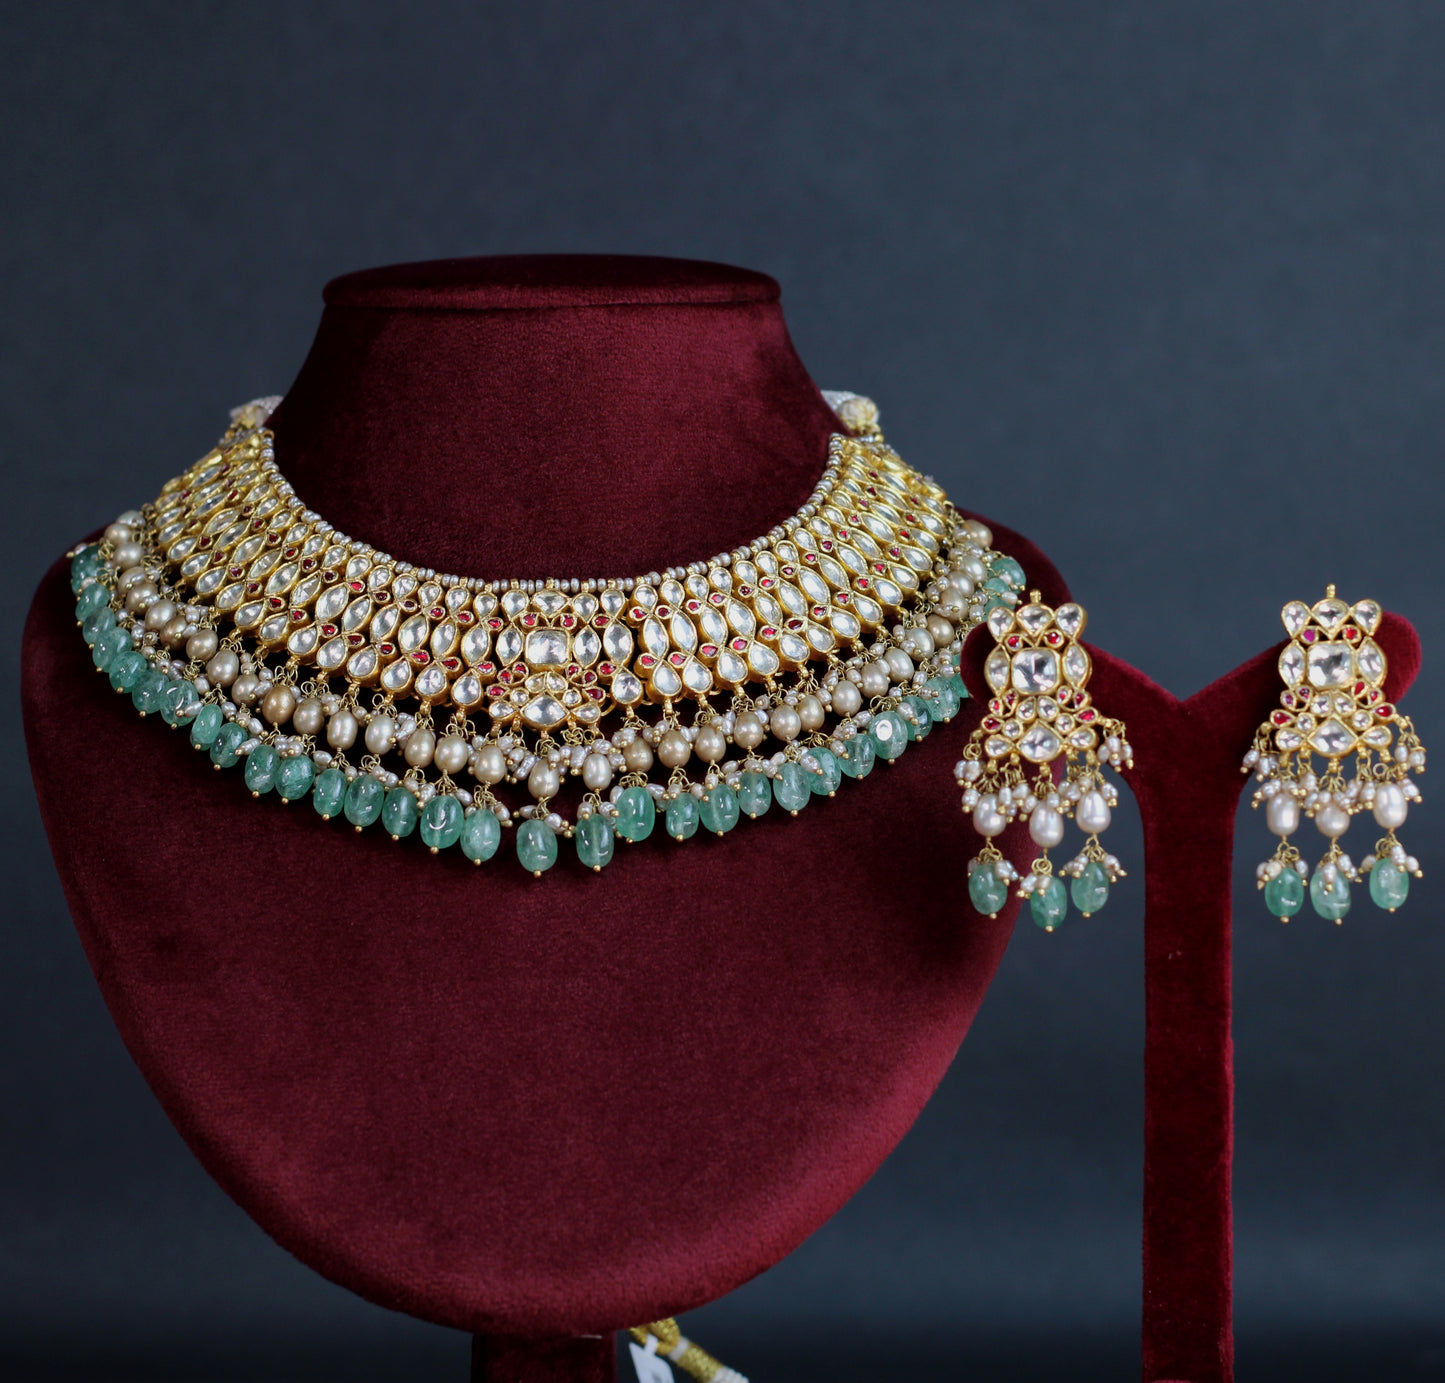 NECKLACE AND EARRING IN 92.5 STERLING SILVER WITH 18KT GOLD PLATED KUNDAN,FLOURIDE,CULTURE PEARLS,FRESH WATER PEARLS